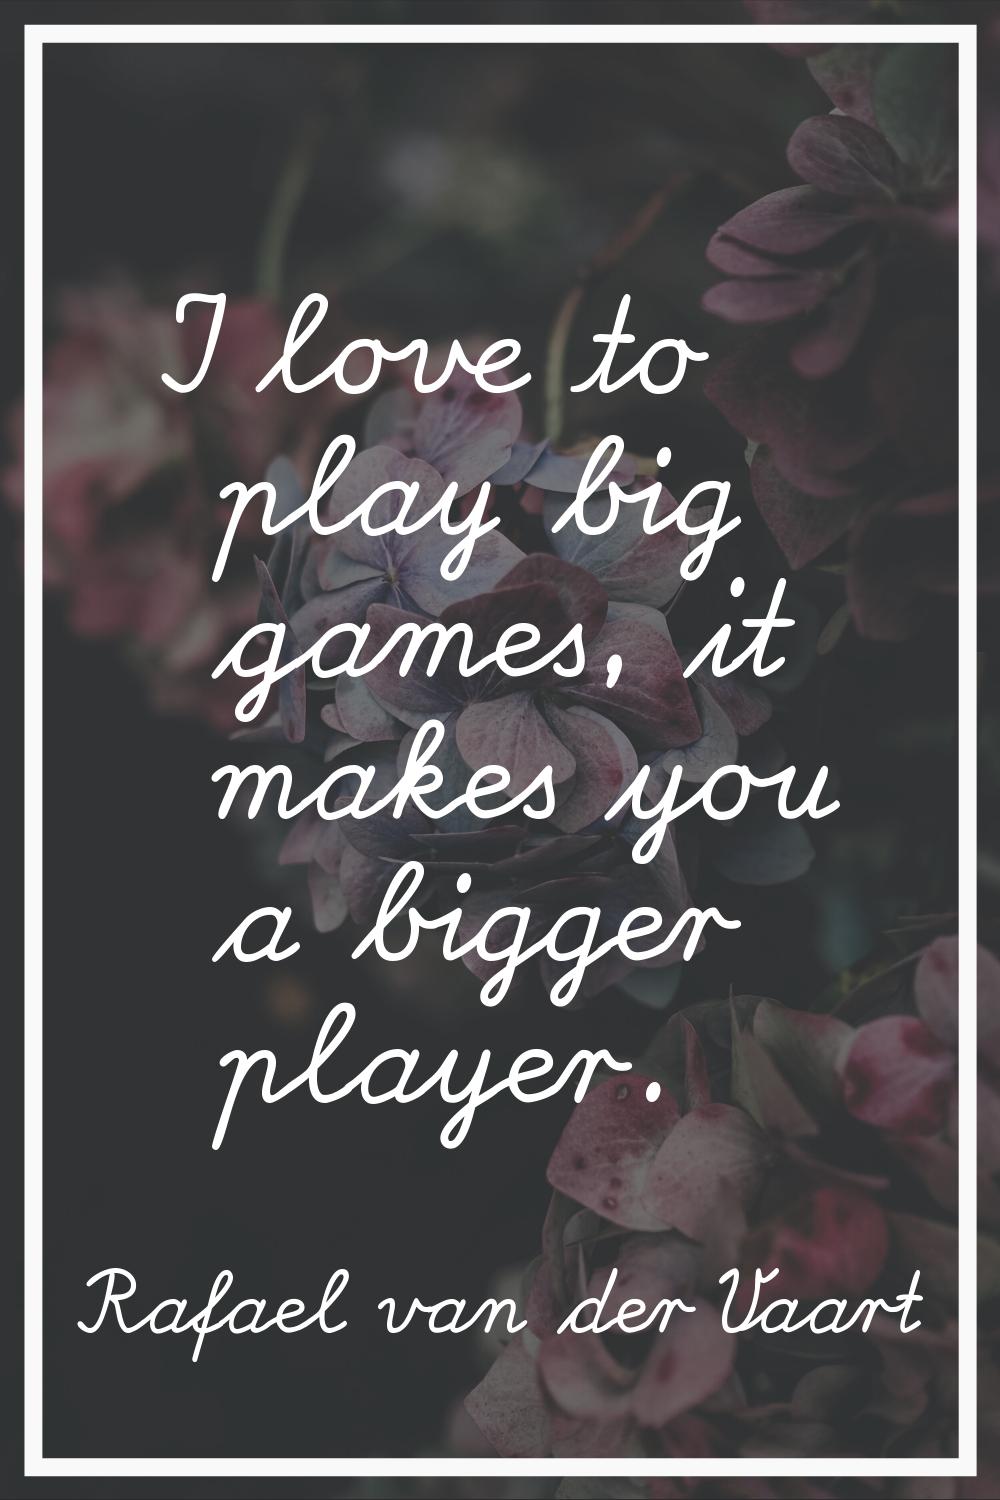 I love to play big games, it makes you a bigger player.